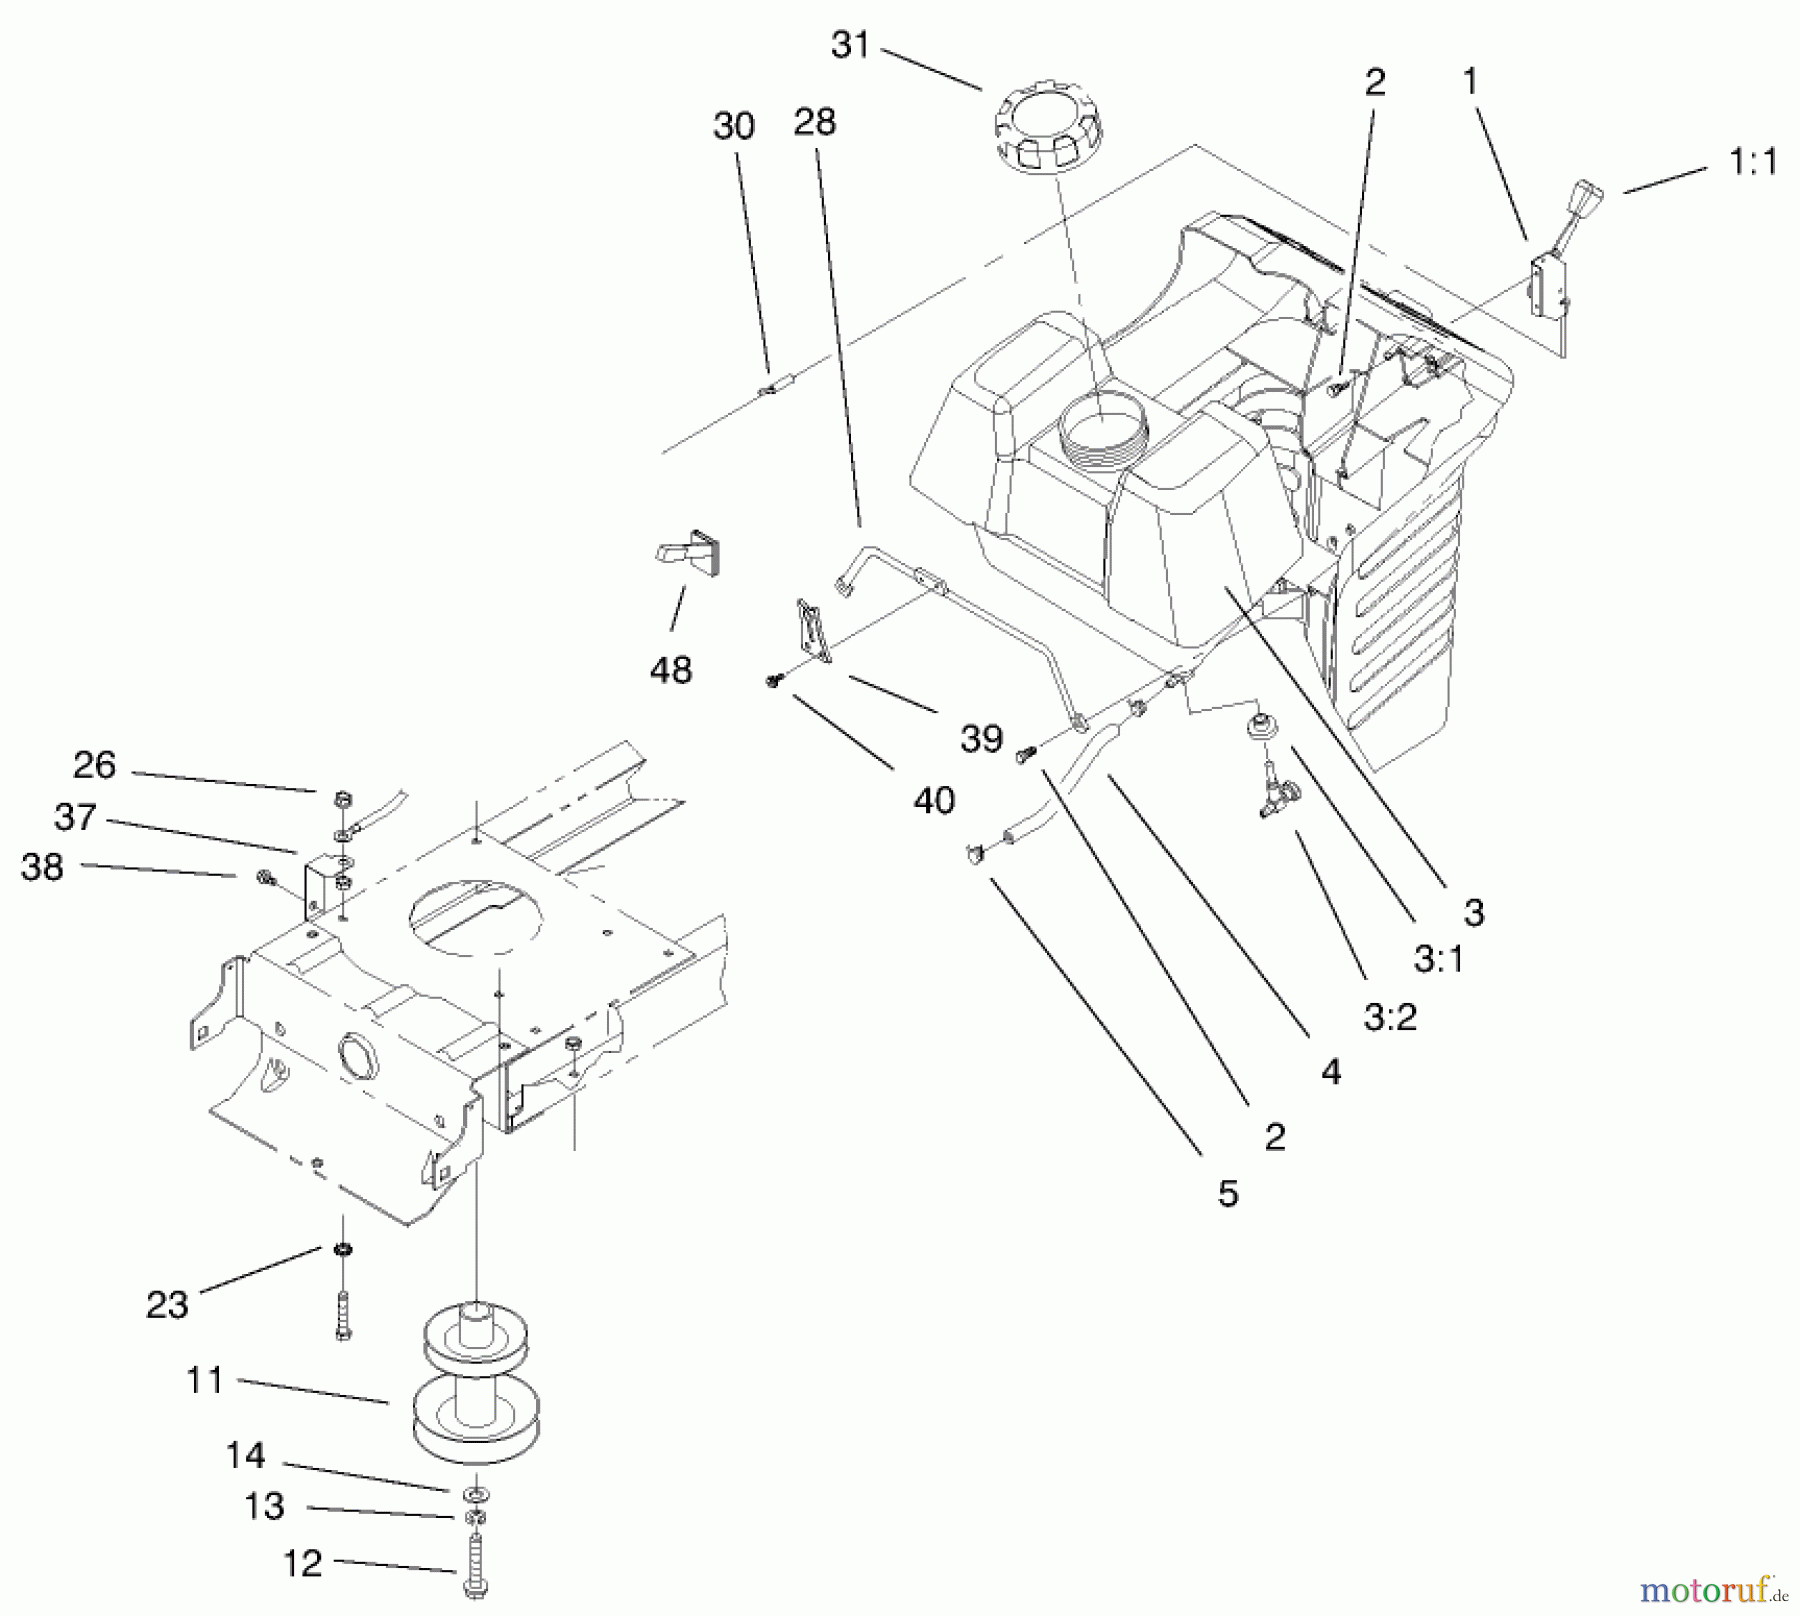  Toro Neu Mowers, Lawn & Garden Tractor Seite 1 71209 (13-32XLE) - Toro 13-32XLE Lawn Tractor, 1999 (9900001-9999999) ENGINE SYSTEM COMPONENTS ASSEMBLY #1